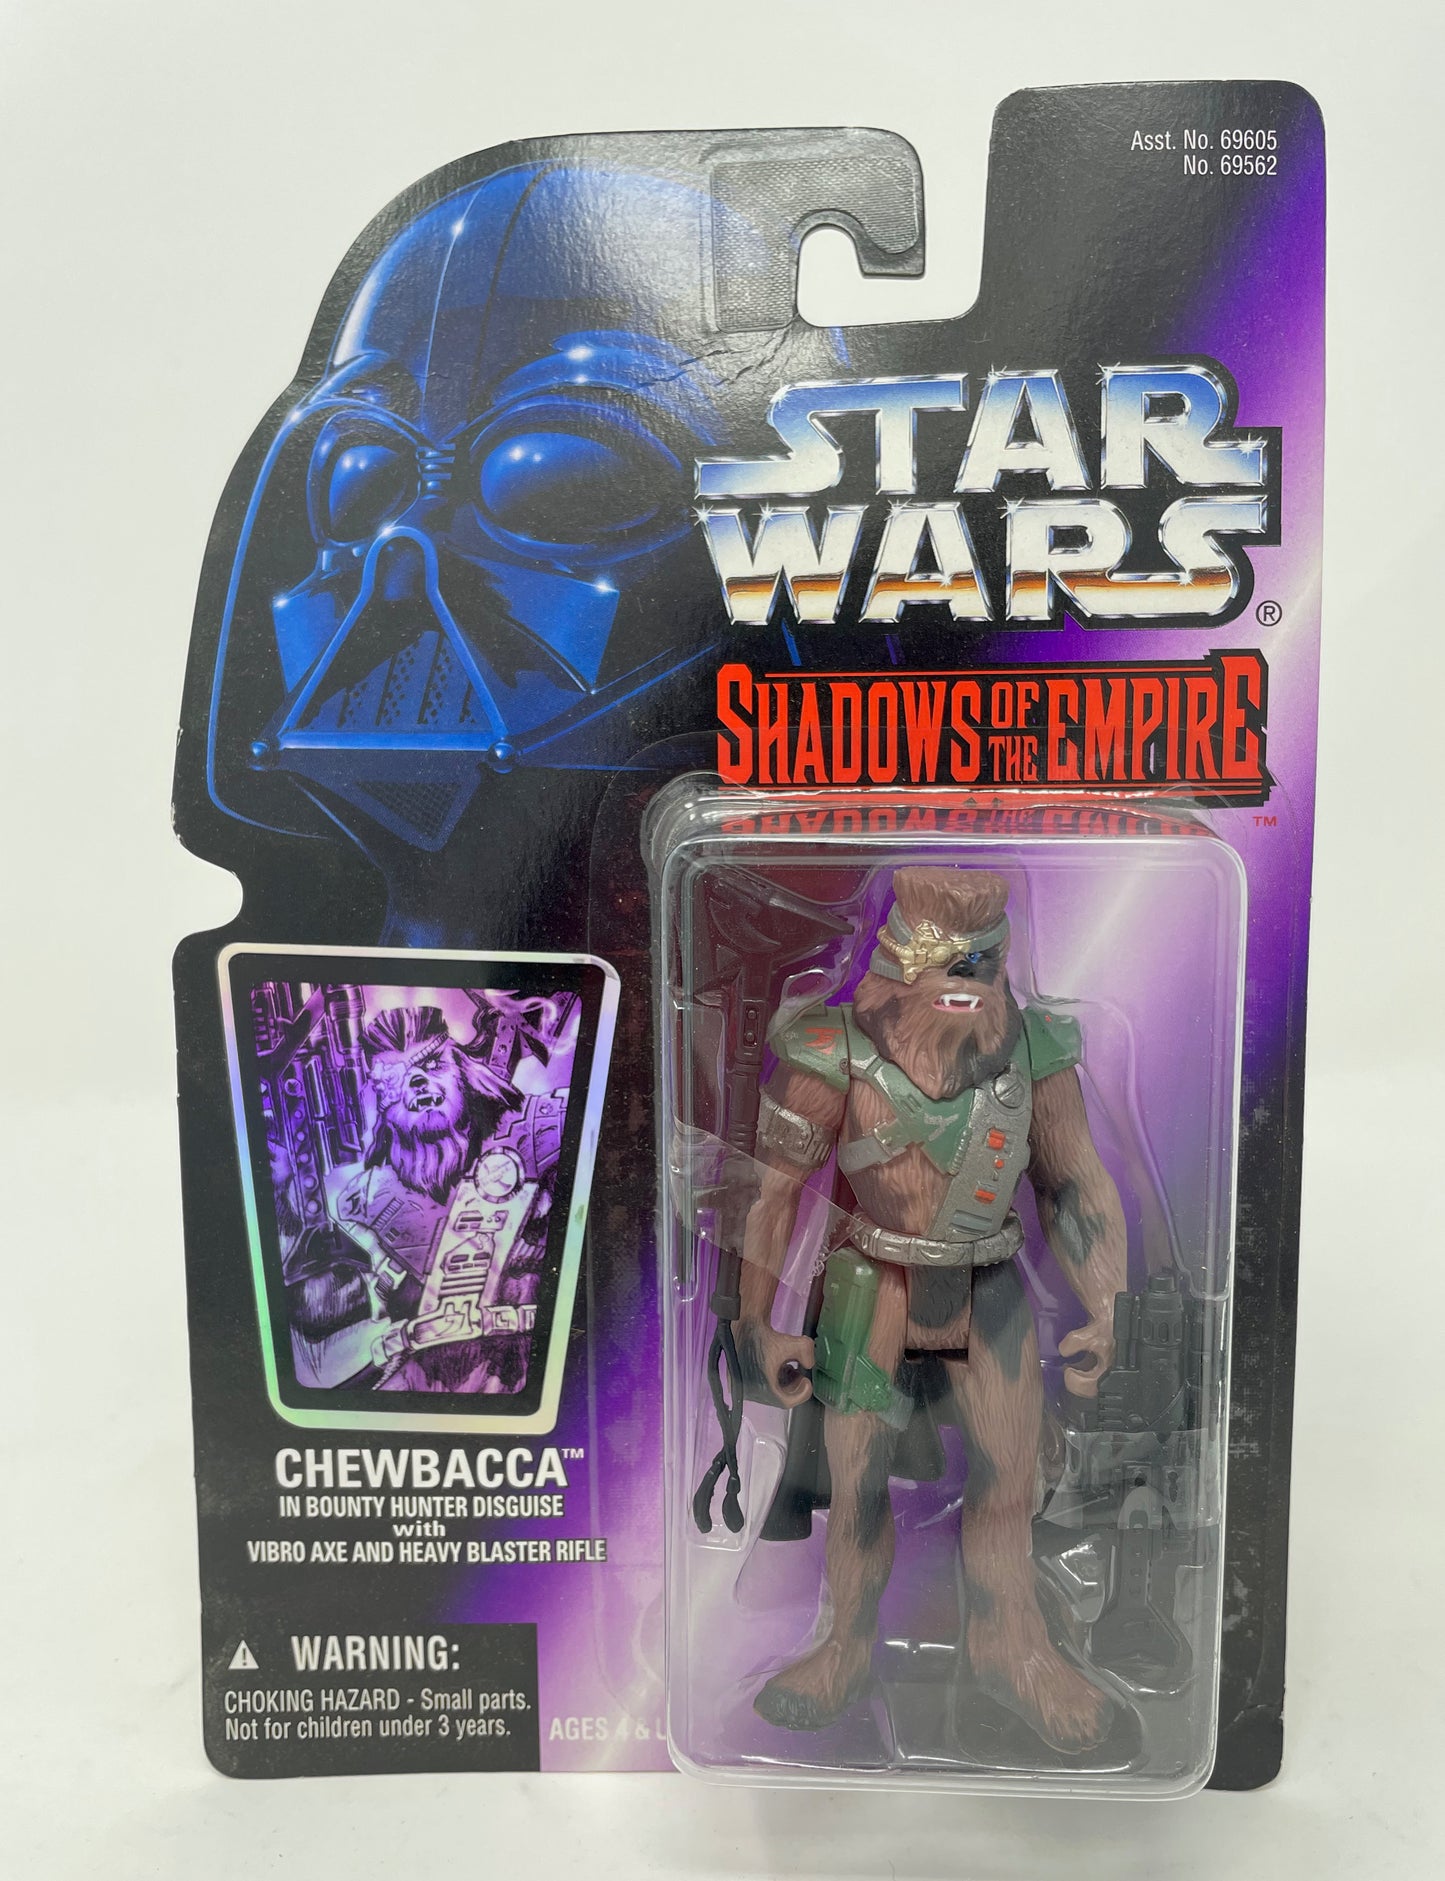 CHEWBACCA IN BOUNTY HUNTER DISGUISE - STAR WARS SHADOWS OF THE EMPIRE - 1996 KENNER/HASBRO